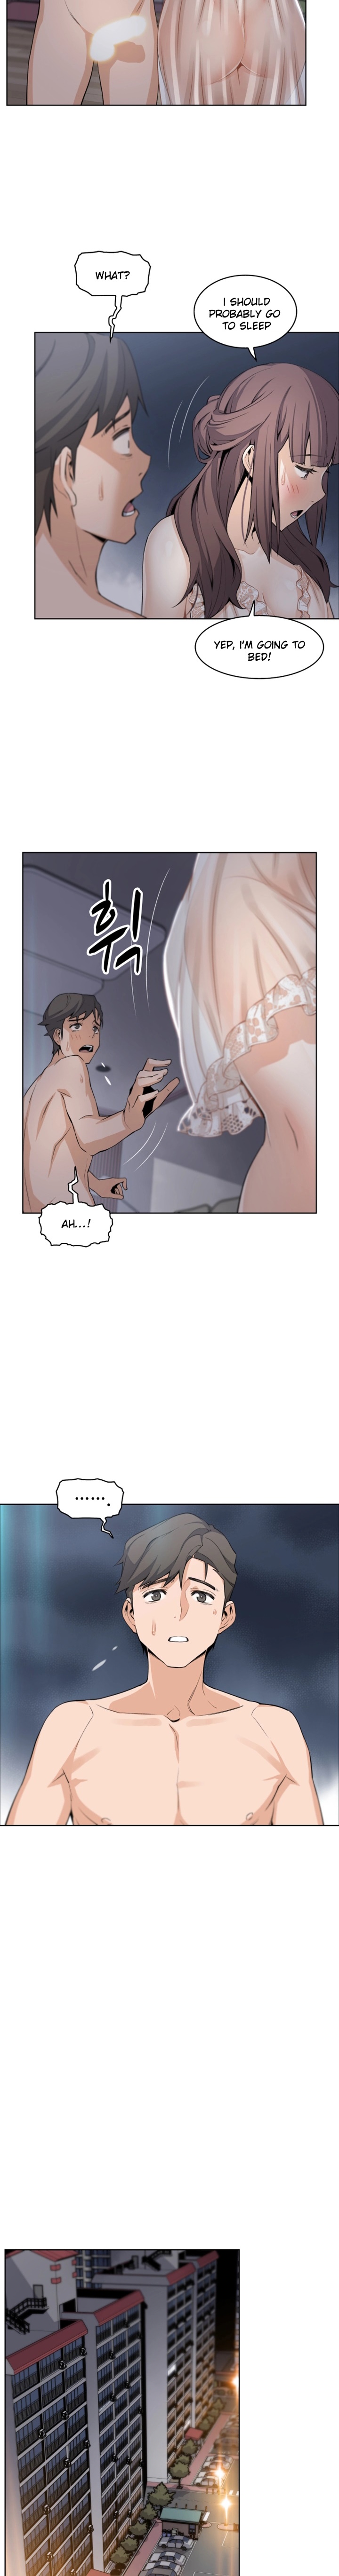 Housekeeper Manhwa - Chapter 12 Page 8